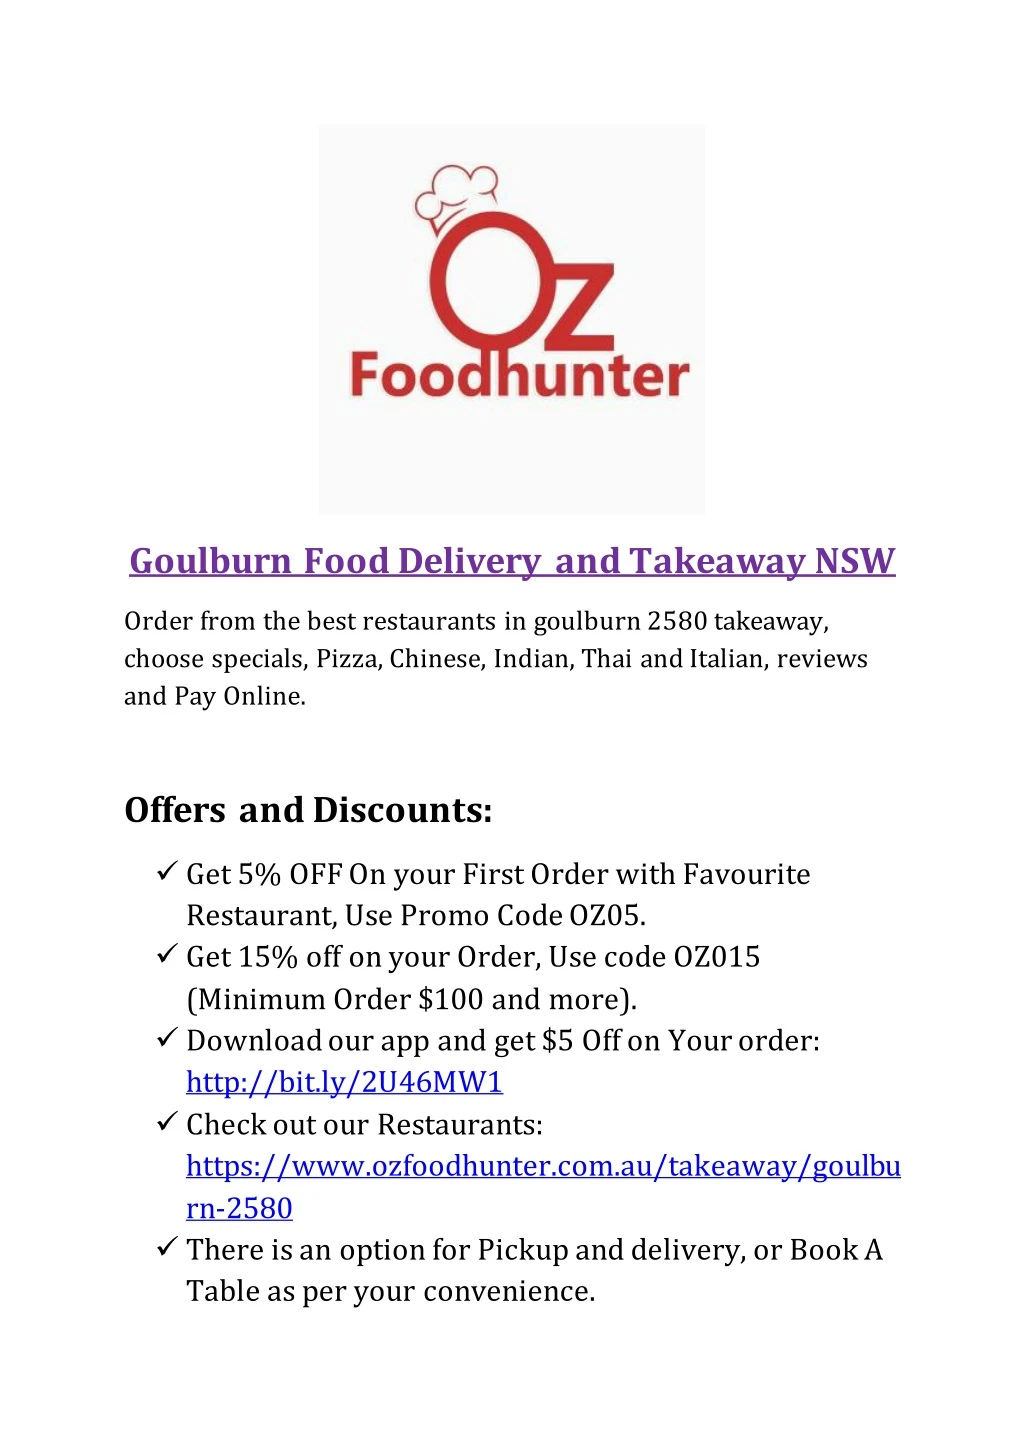 goulburn food delivery and takeaway nsw